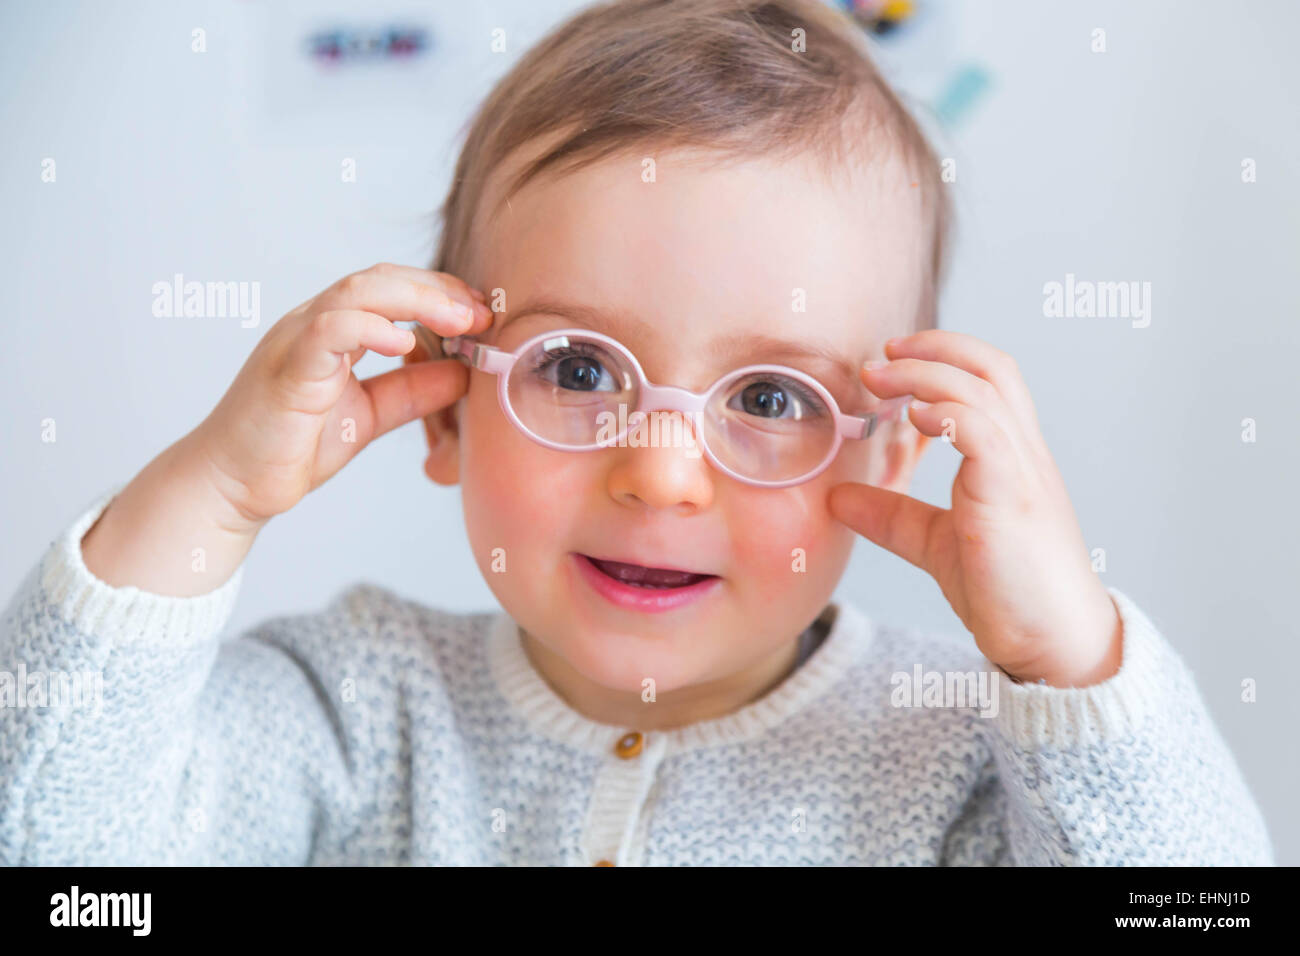 18 month-old baby boy wearing glasses. Stock Photo